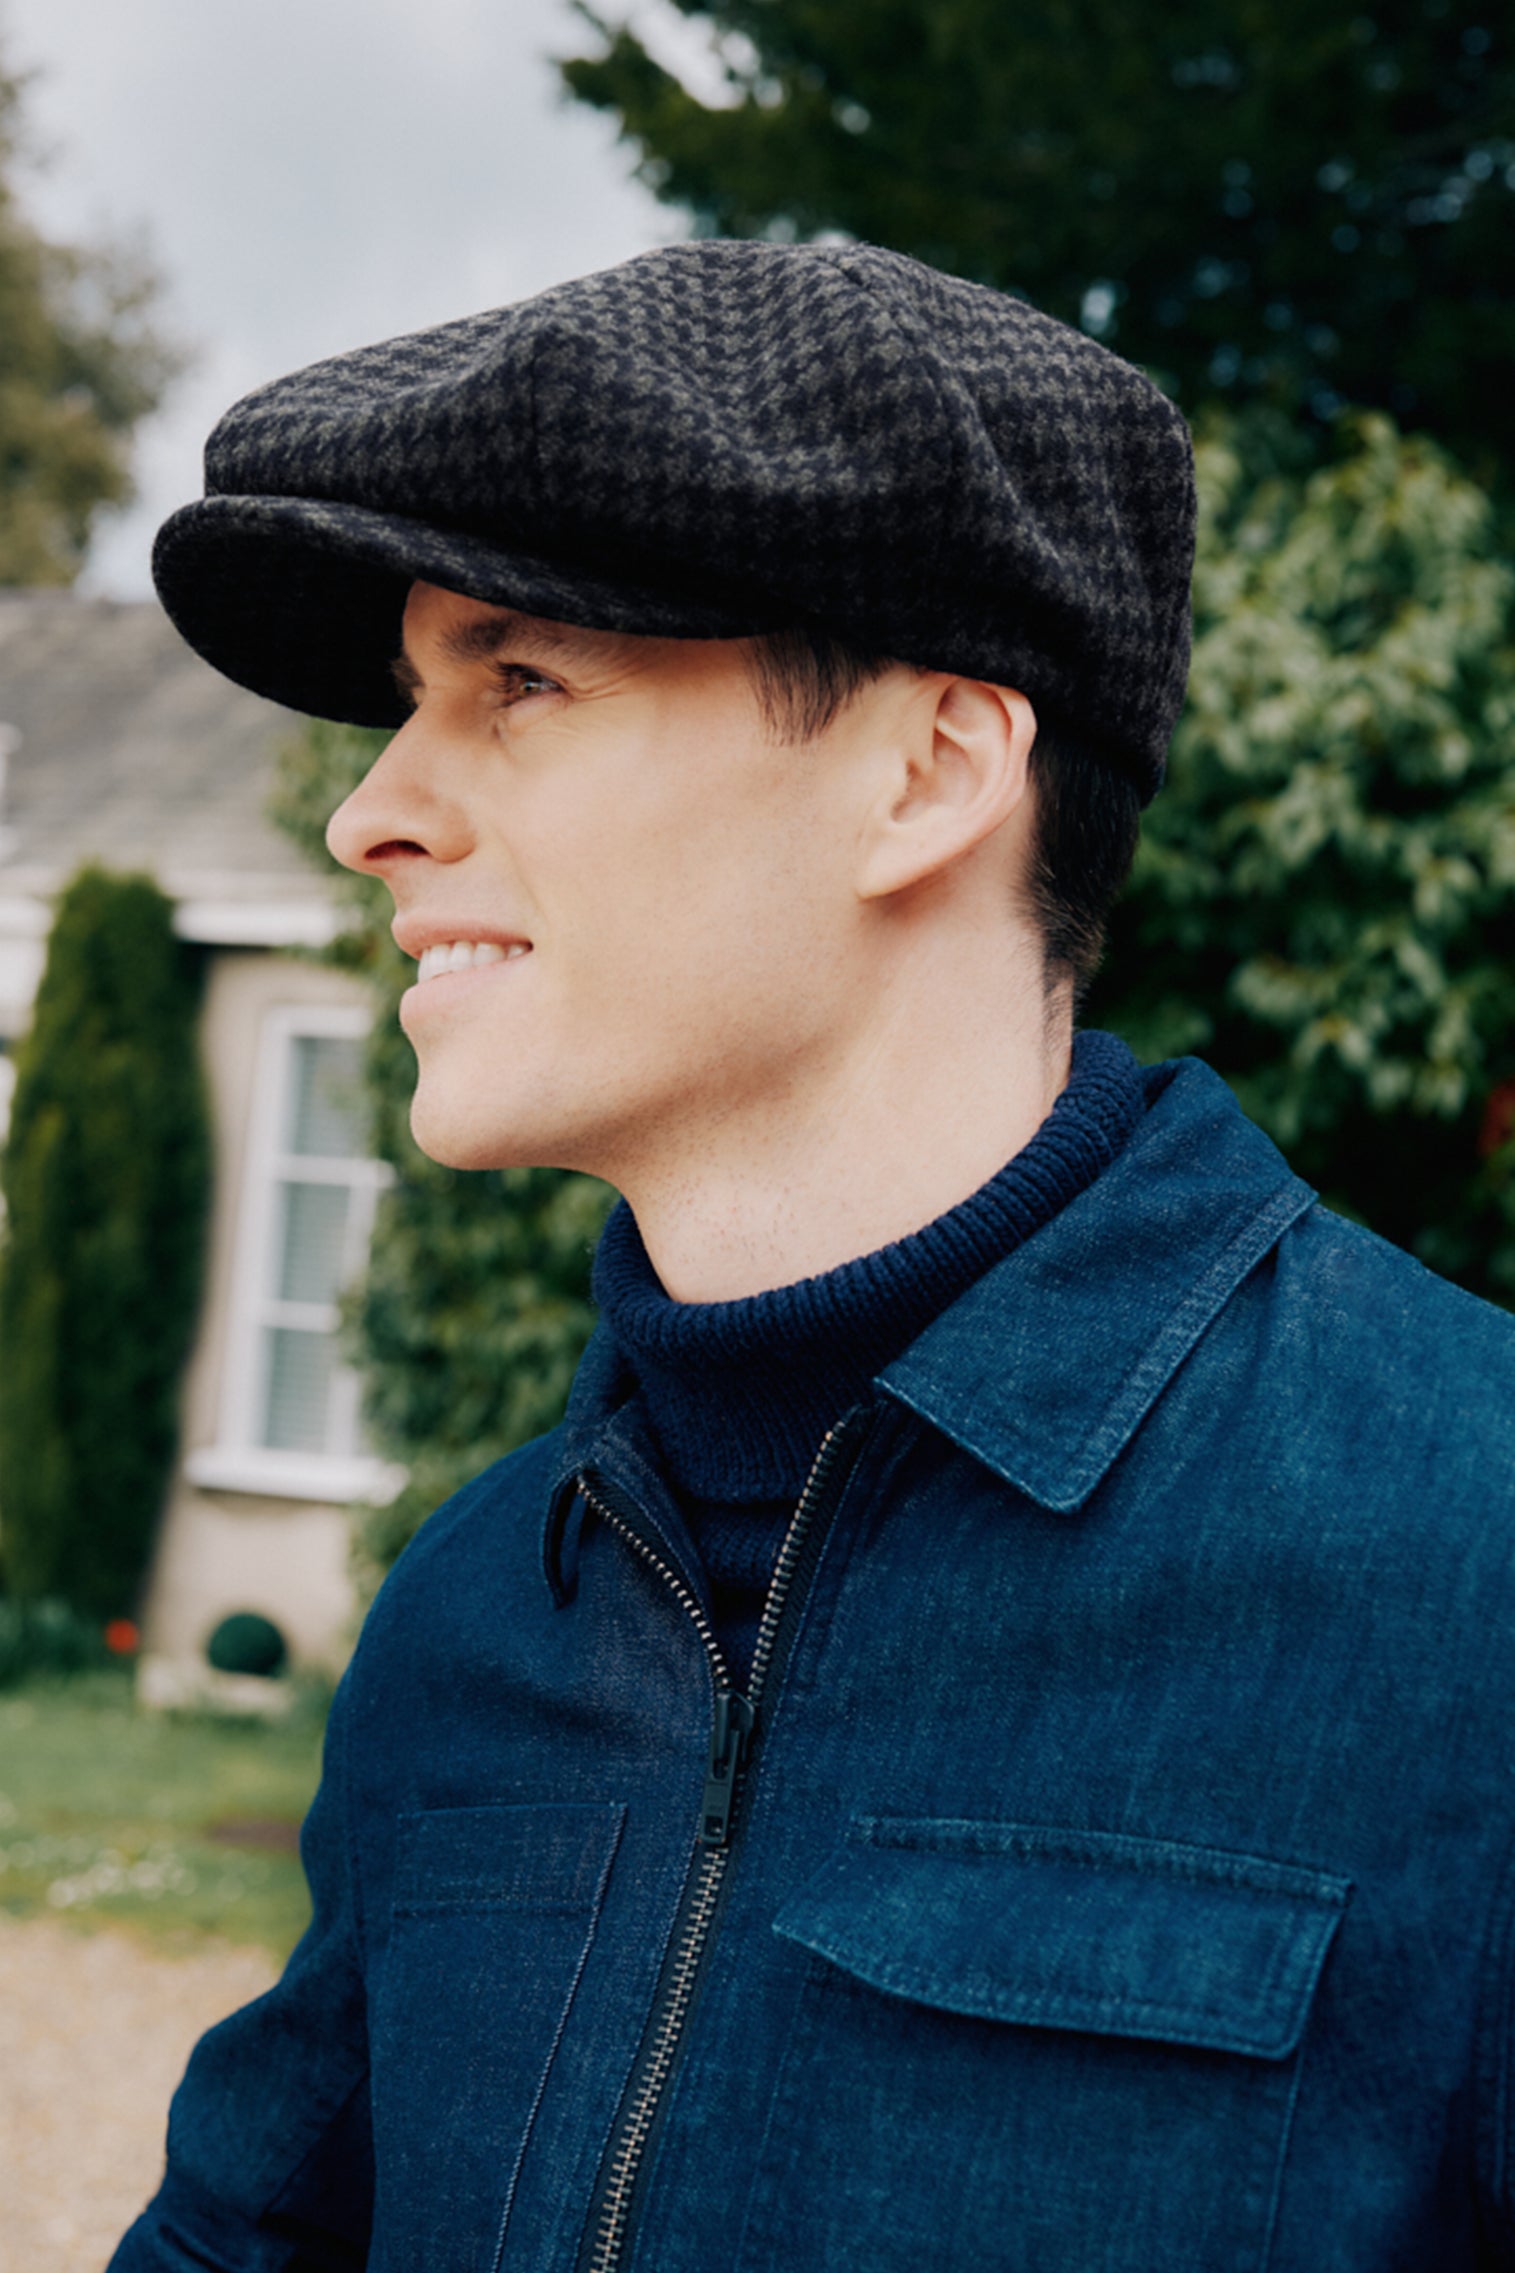 Sandwich Houndstooth Bakerboy Cap - Hats for Round Face Shapes - Lock & Co. Hatters London UK